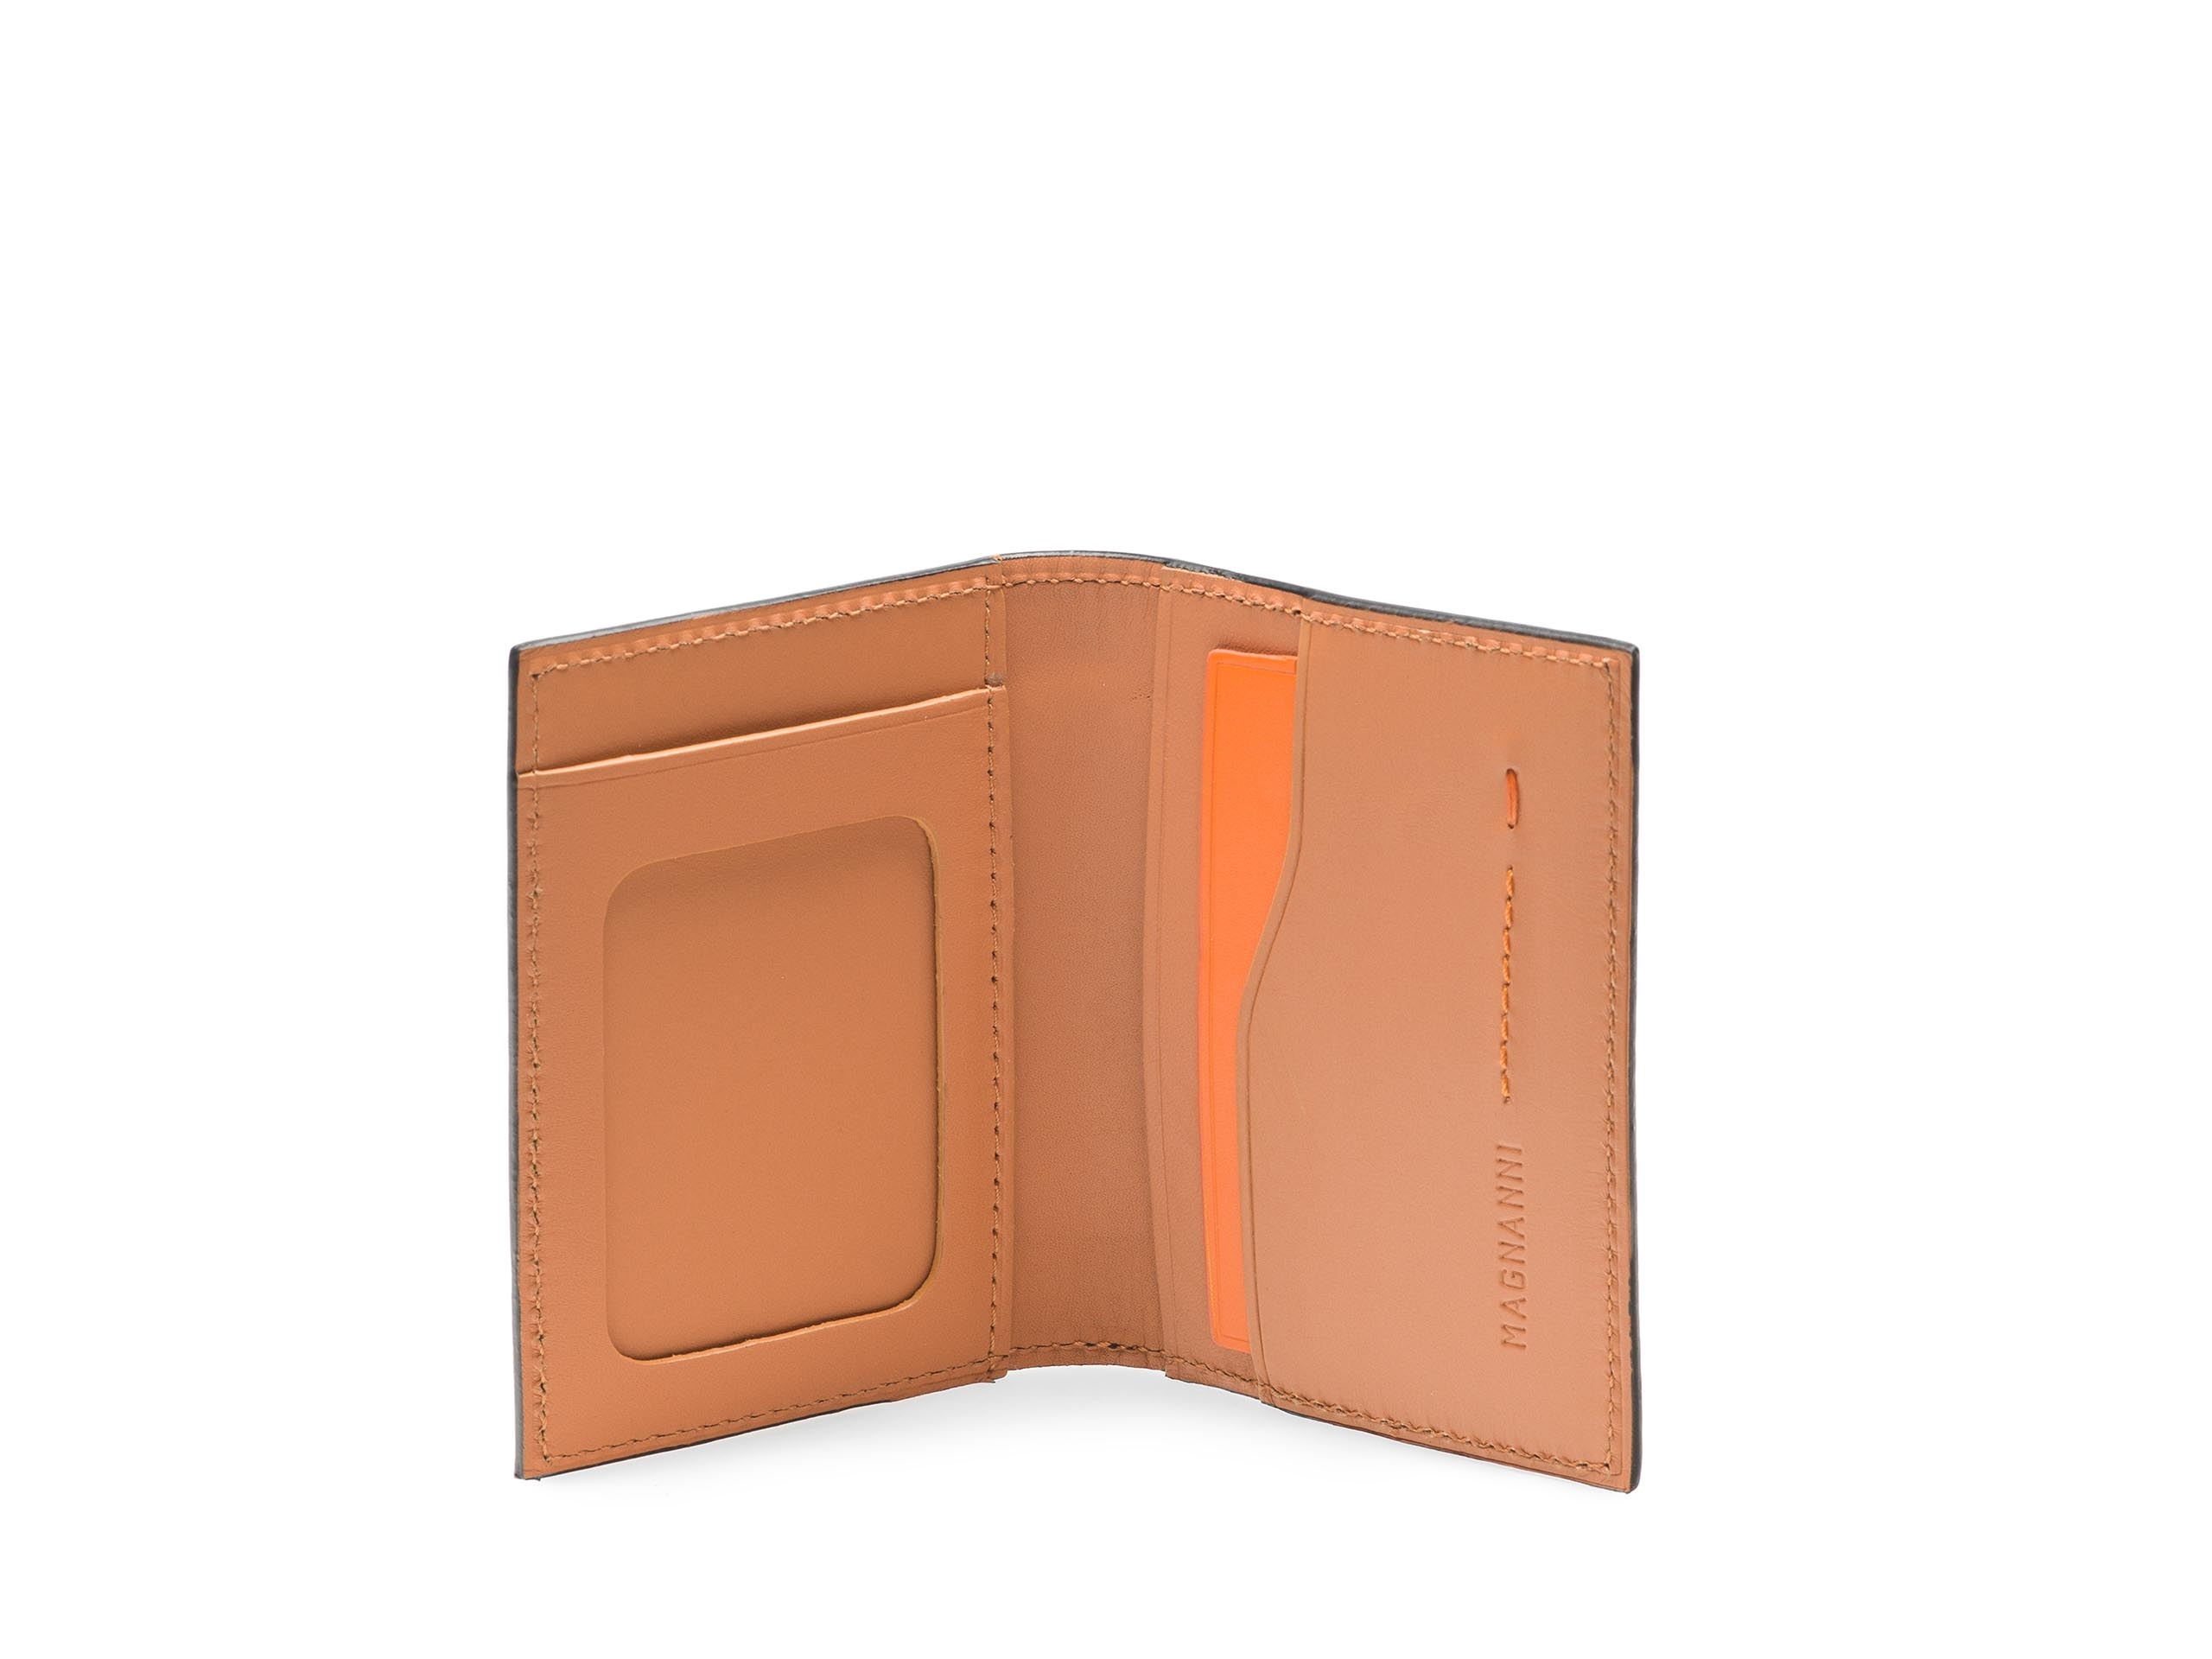 The inside of the card fold midbrown pebble wallet